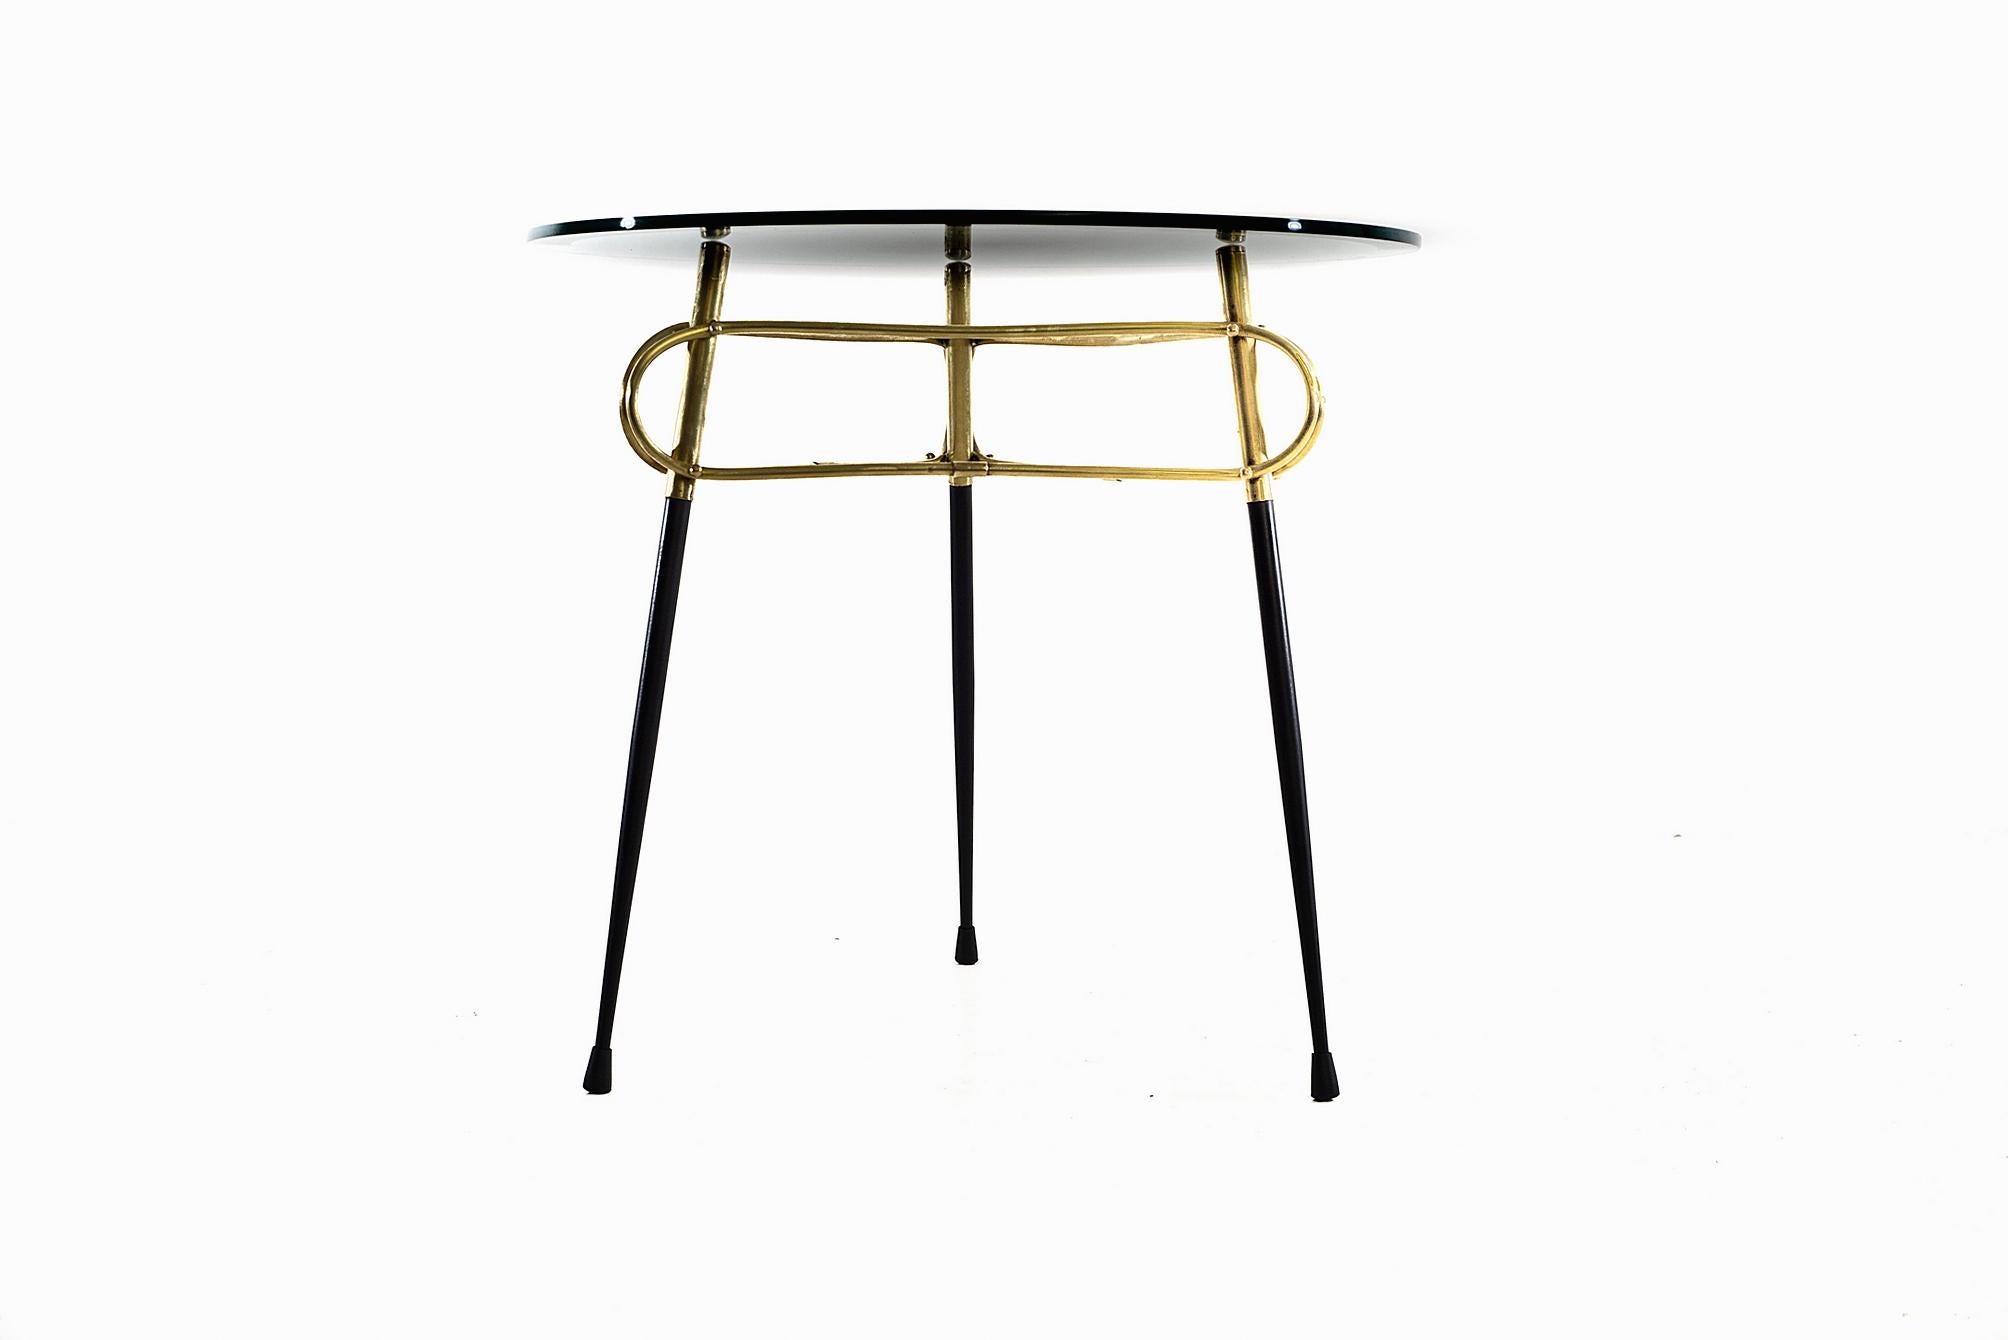 This three legged coffee/cocktail table has a round table top with beveled edges it is resting on a triangular frame in black steel and brass.